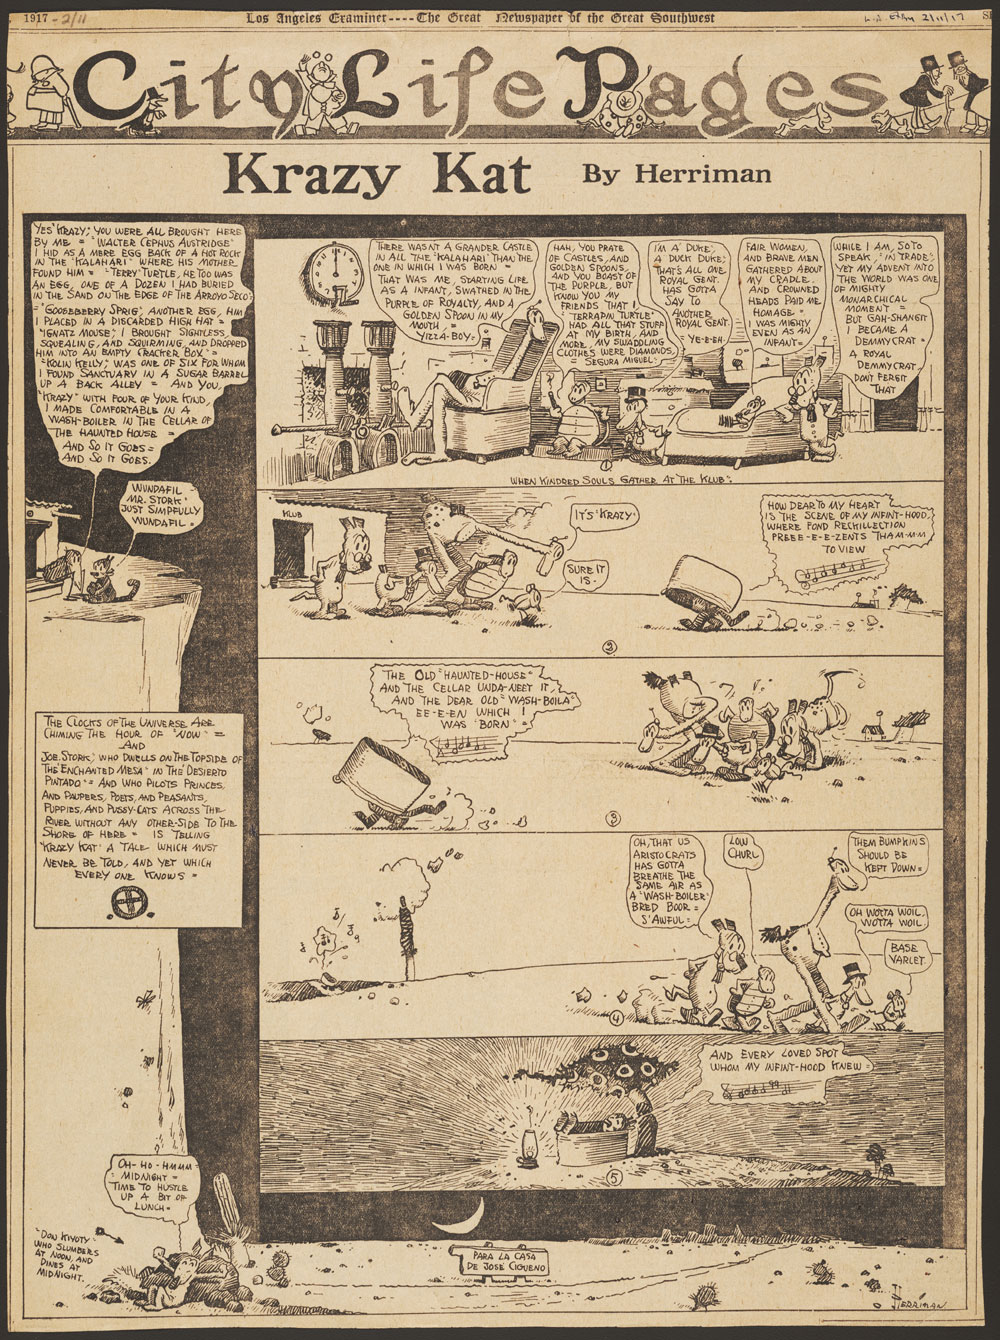 Everyone from Pablo Picasso to H. L. Mencken loved Krazy Kat.